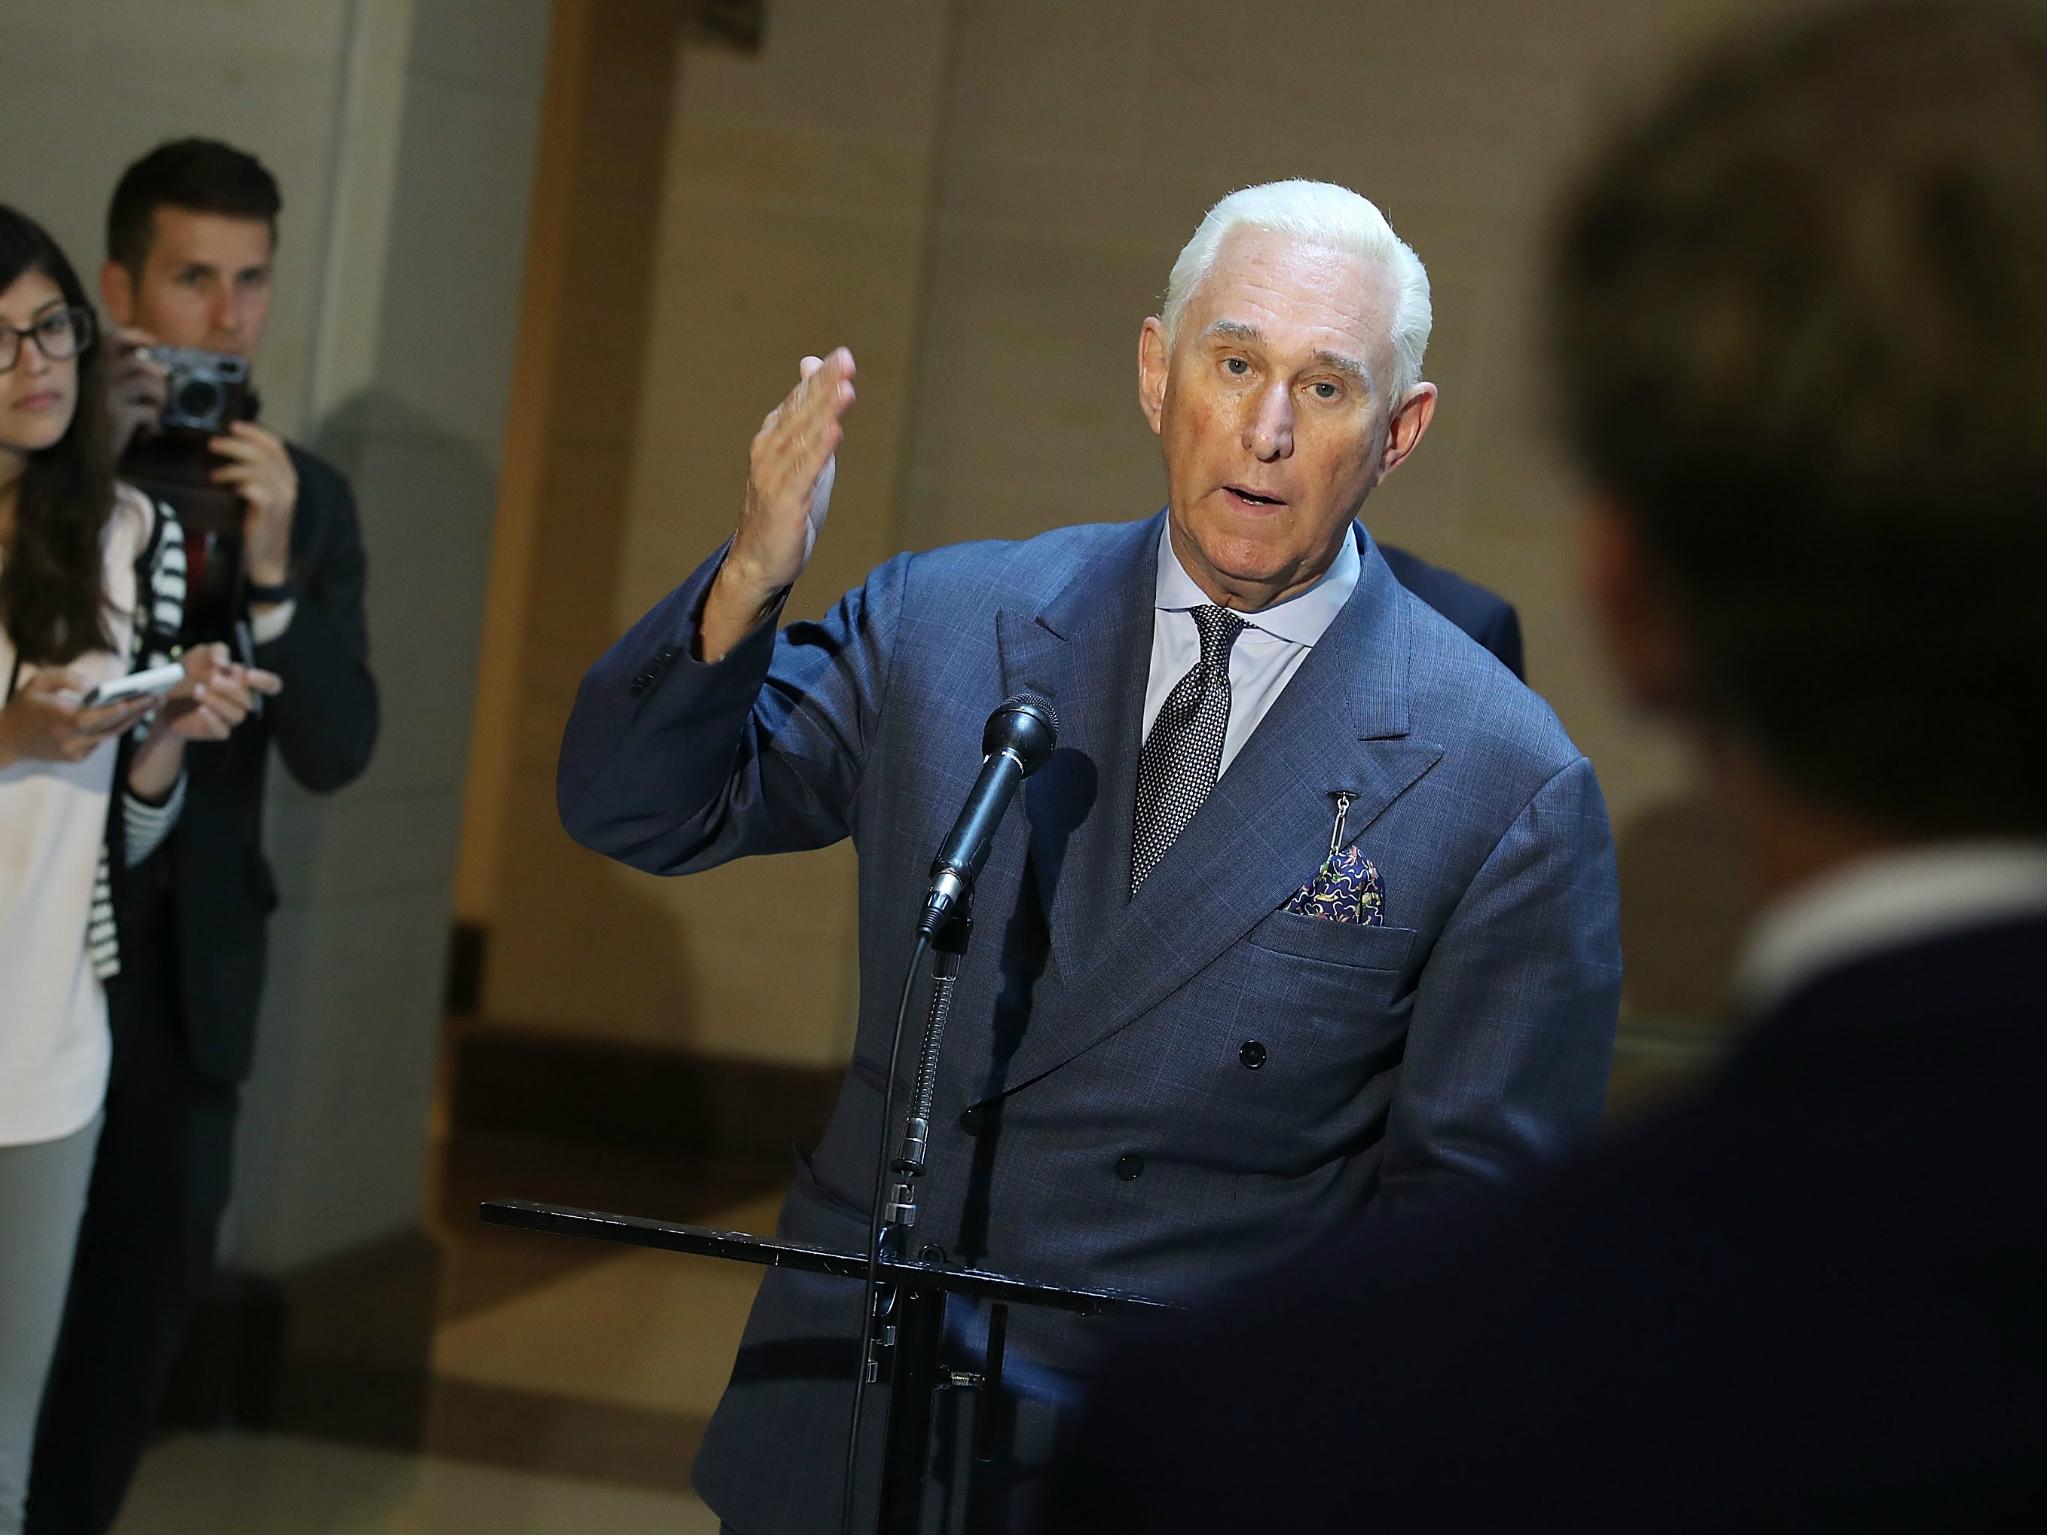 Roger Stone, a Republican strategist and ally of US President Donald Trump, has had his Twitter account suspended.